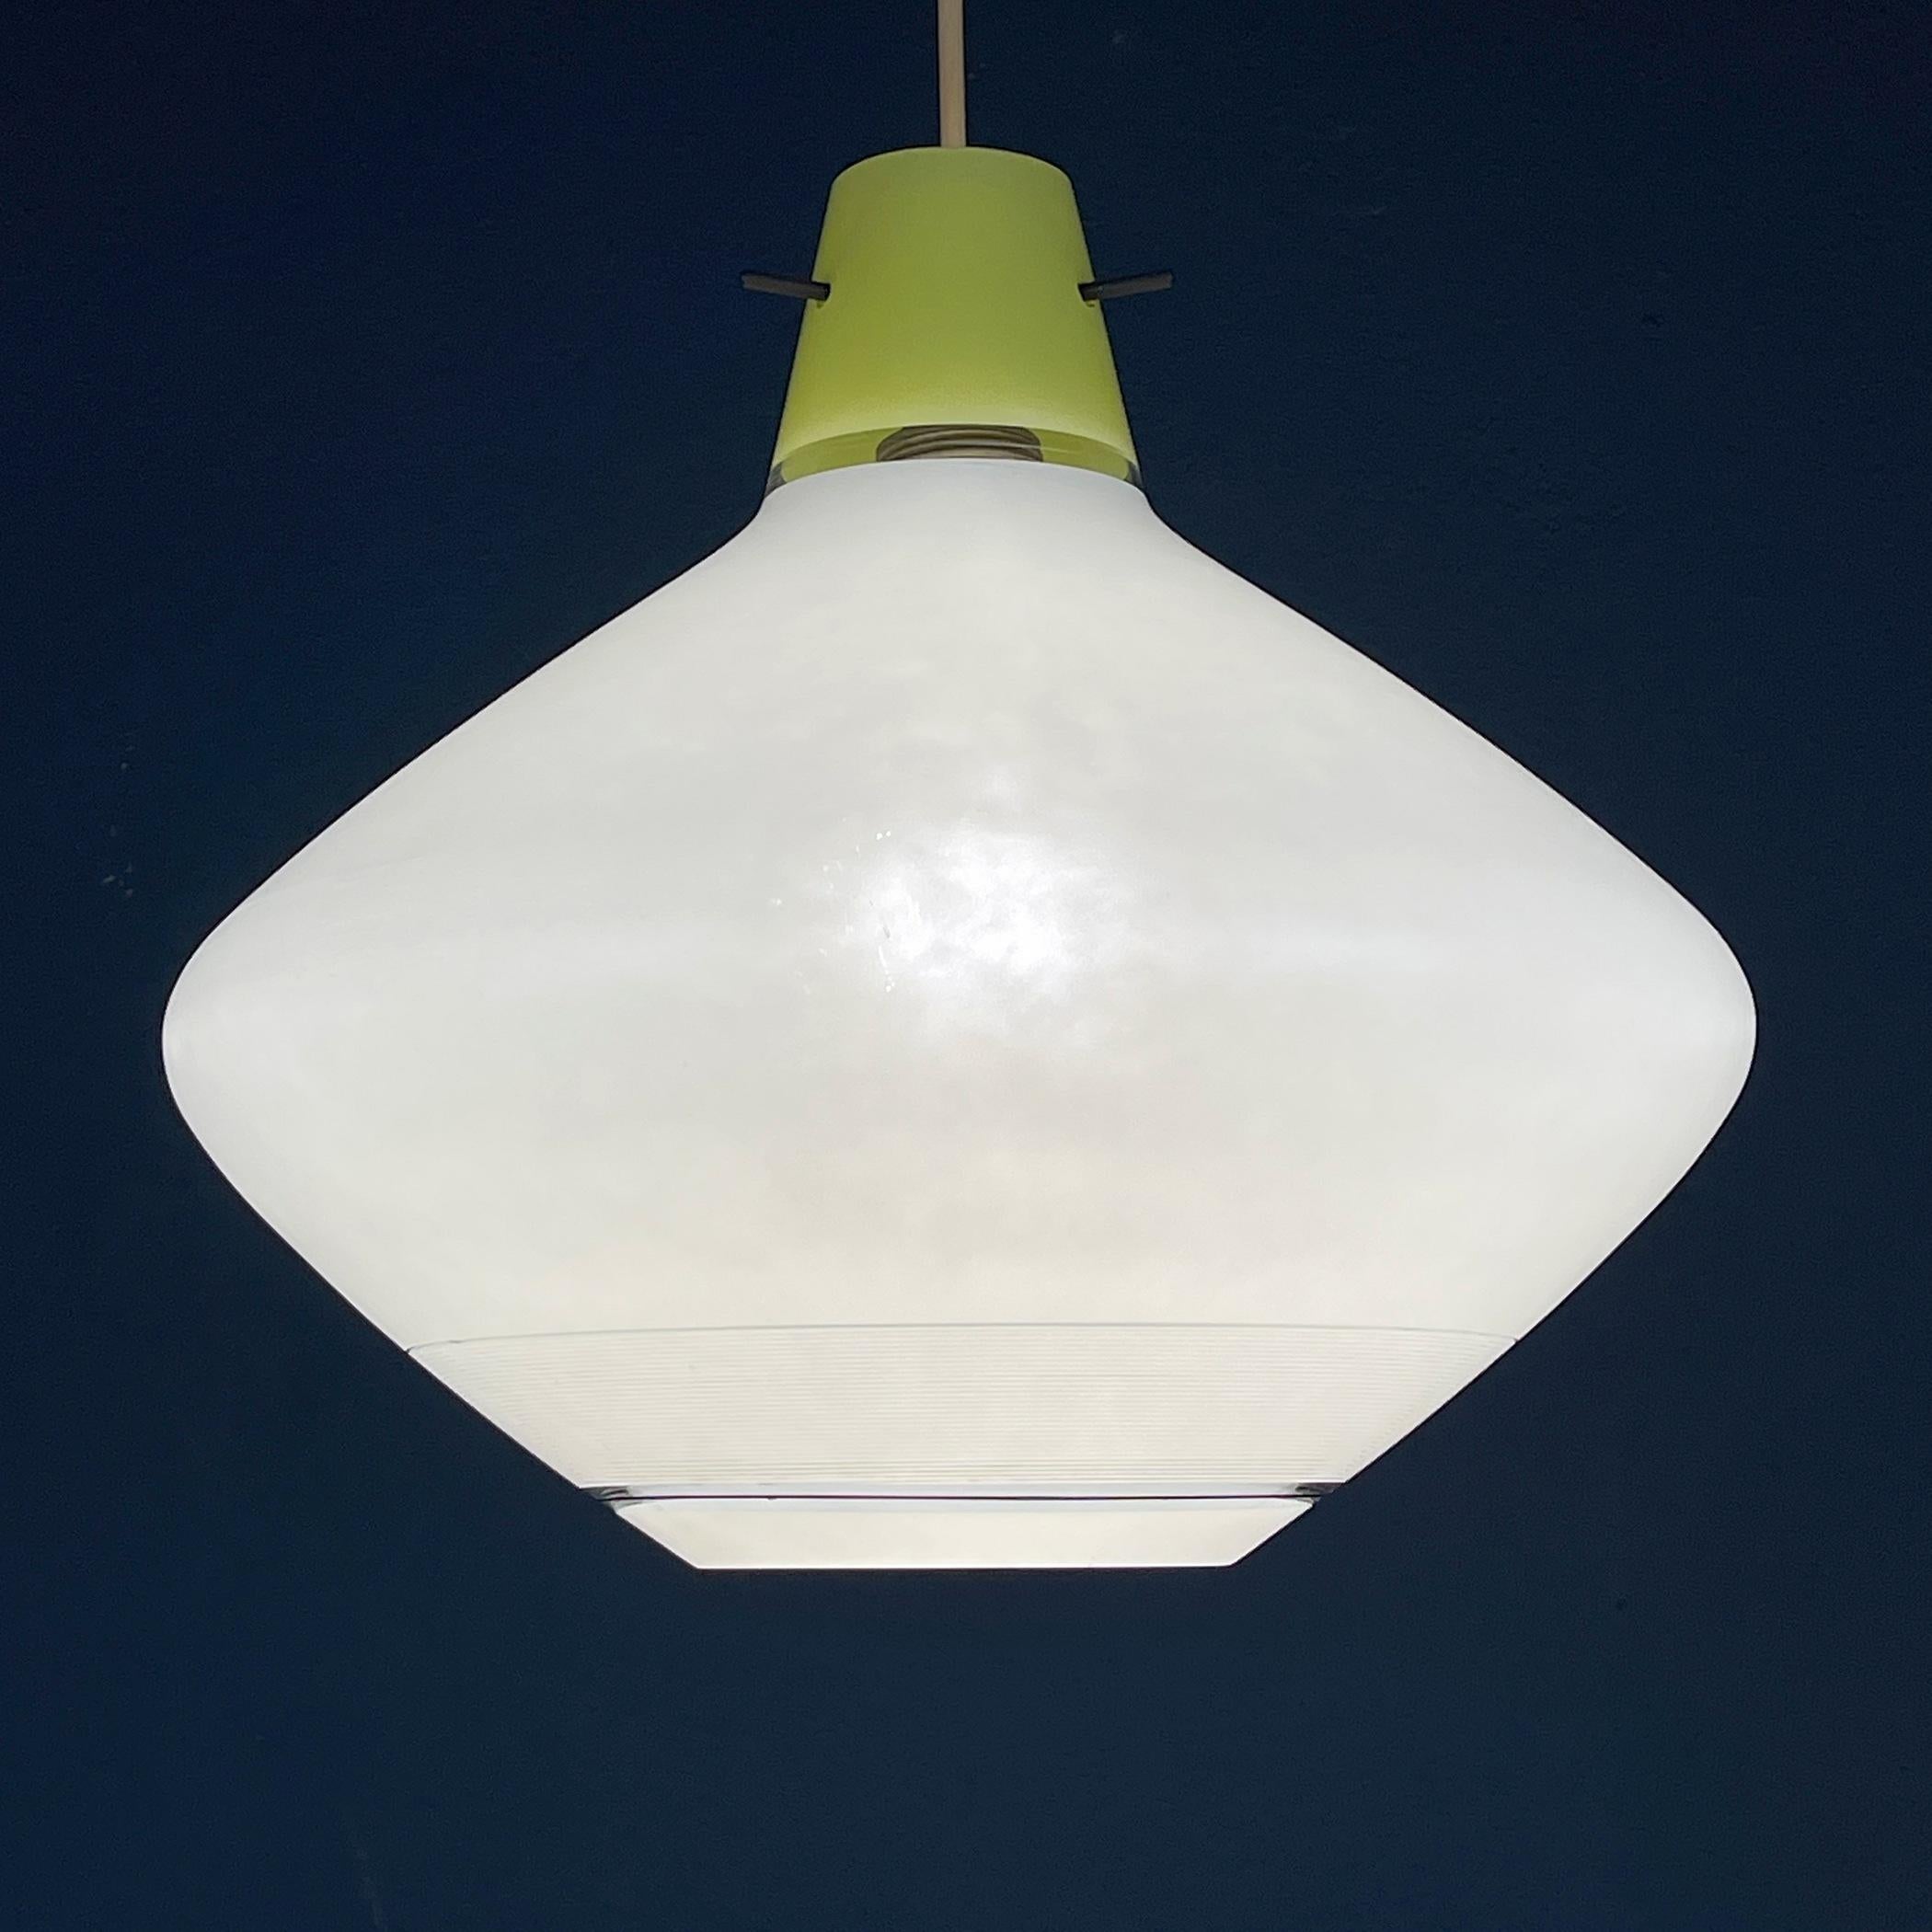 Explore the vintage elegance of this white pendant lamp, crafted with exquisite artistry in Italy during the 1950s. This magnificent piece bears witness to the skill and dedication of master glassblowers who poured their expertise into its creation.